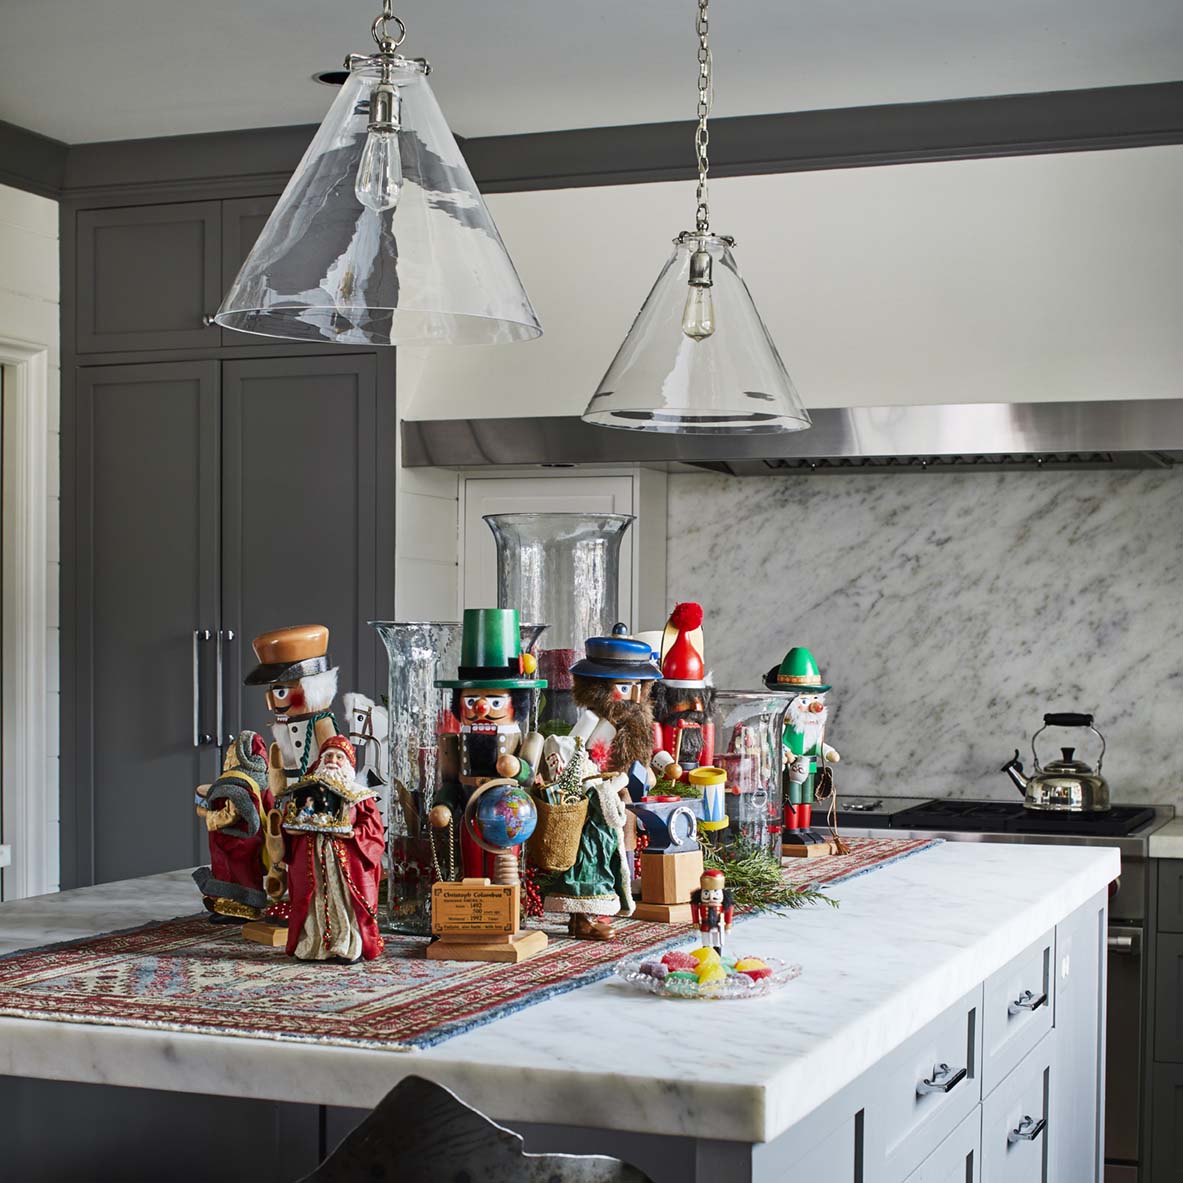 For the holiday home tour, a large mable-topped kitchen islands holds a collection of nutcrackers displayed on a small oriental runner